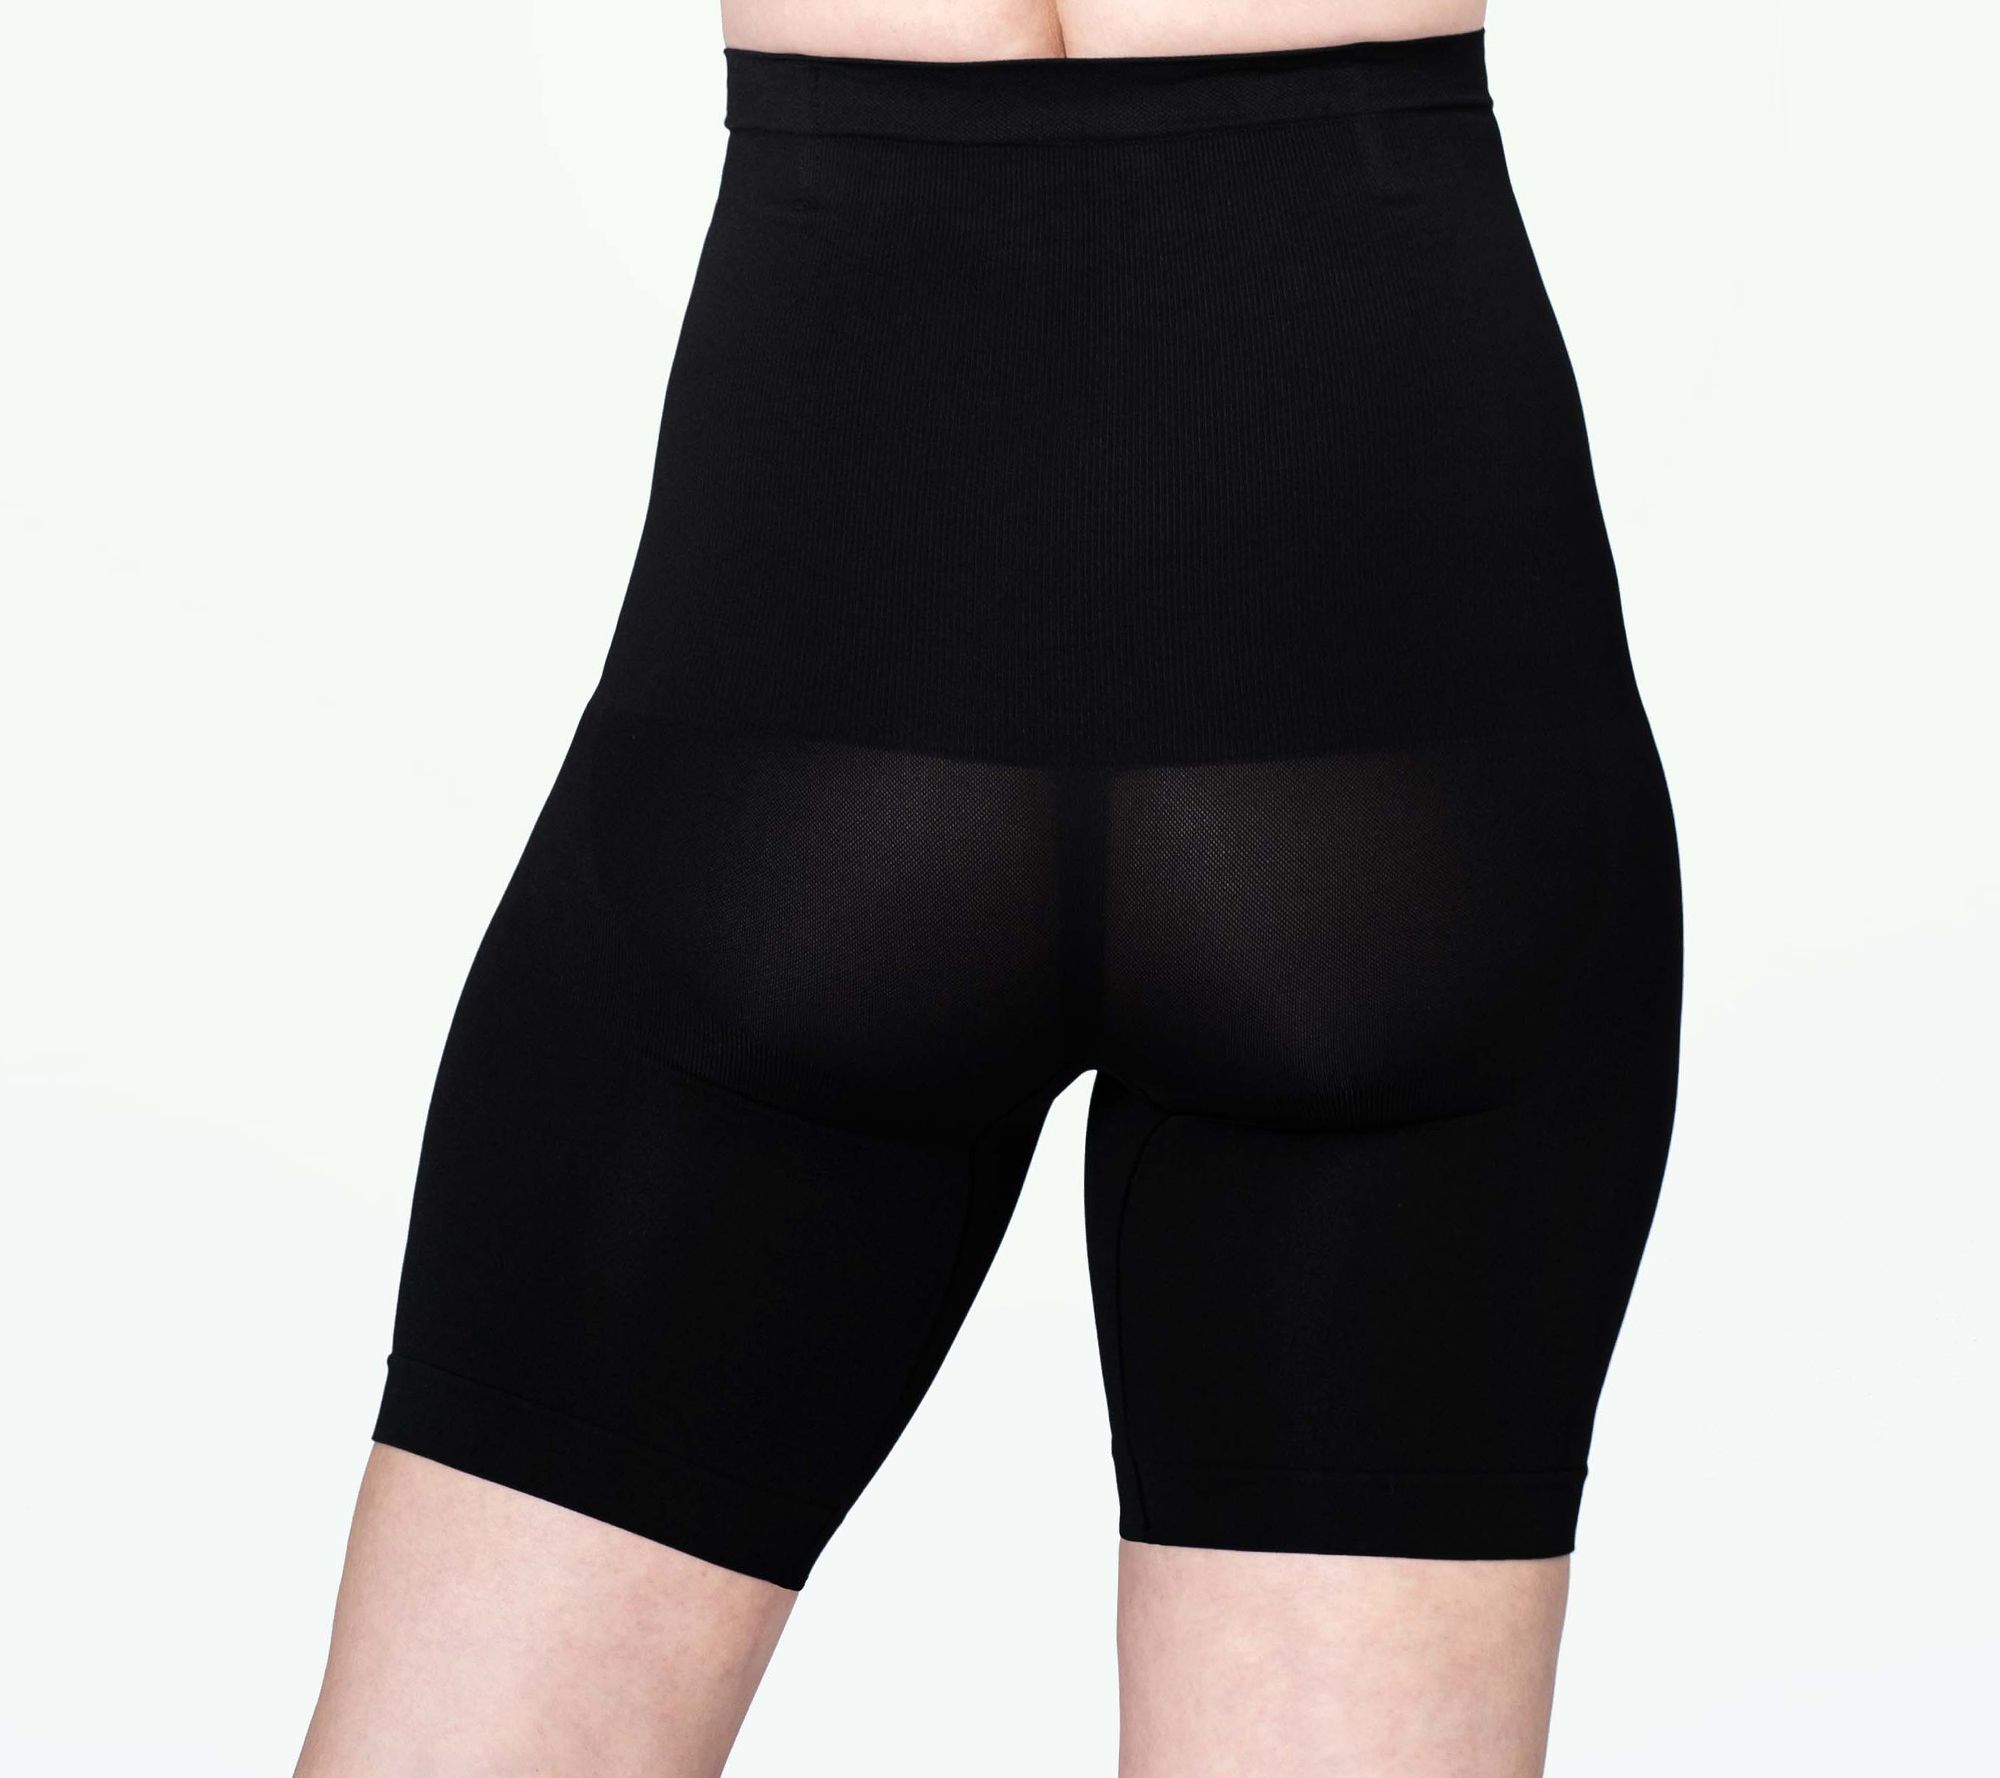 Thanks to the Swee Shapewear which delivers softer, lighter and